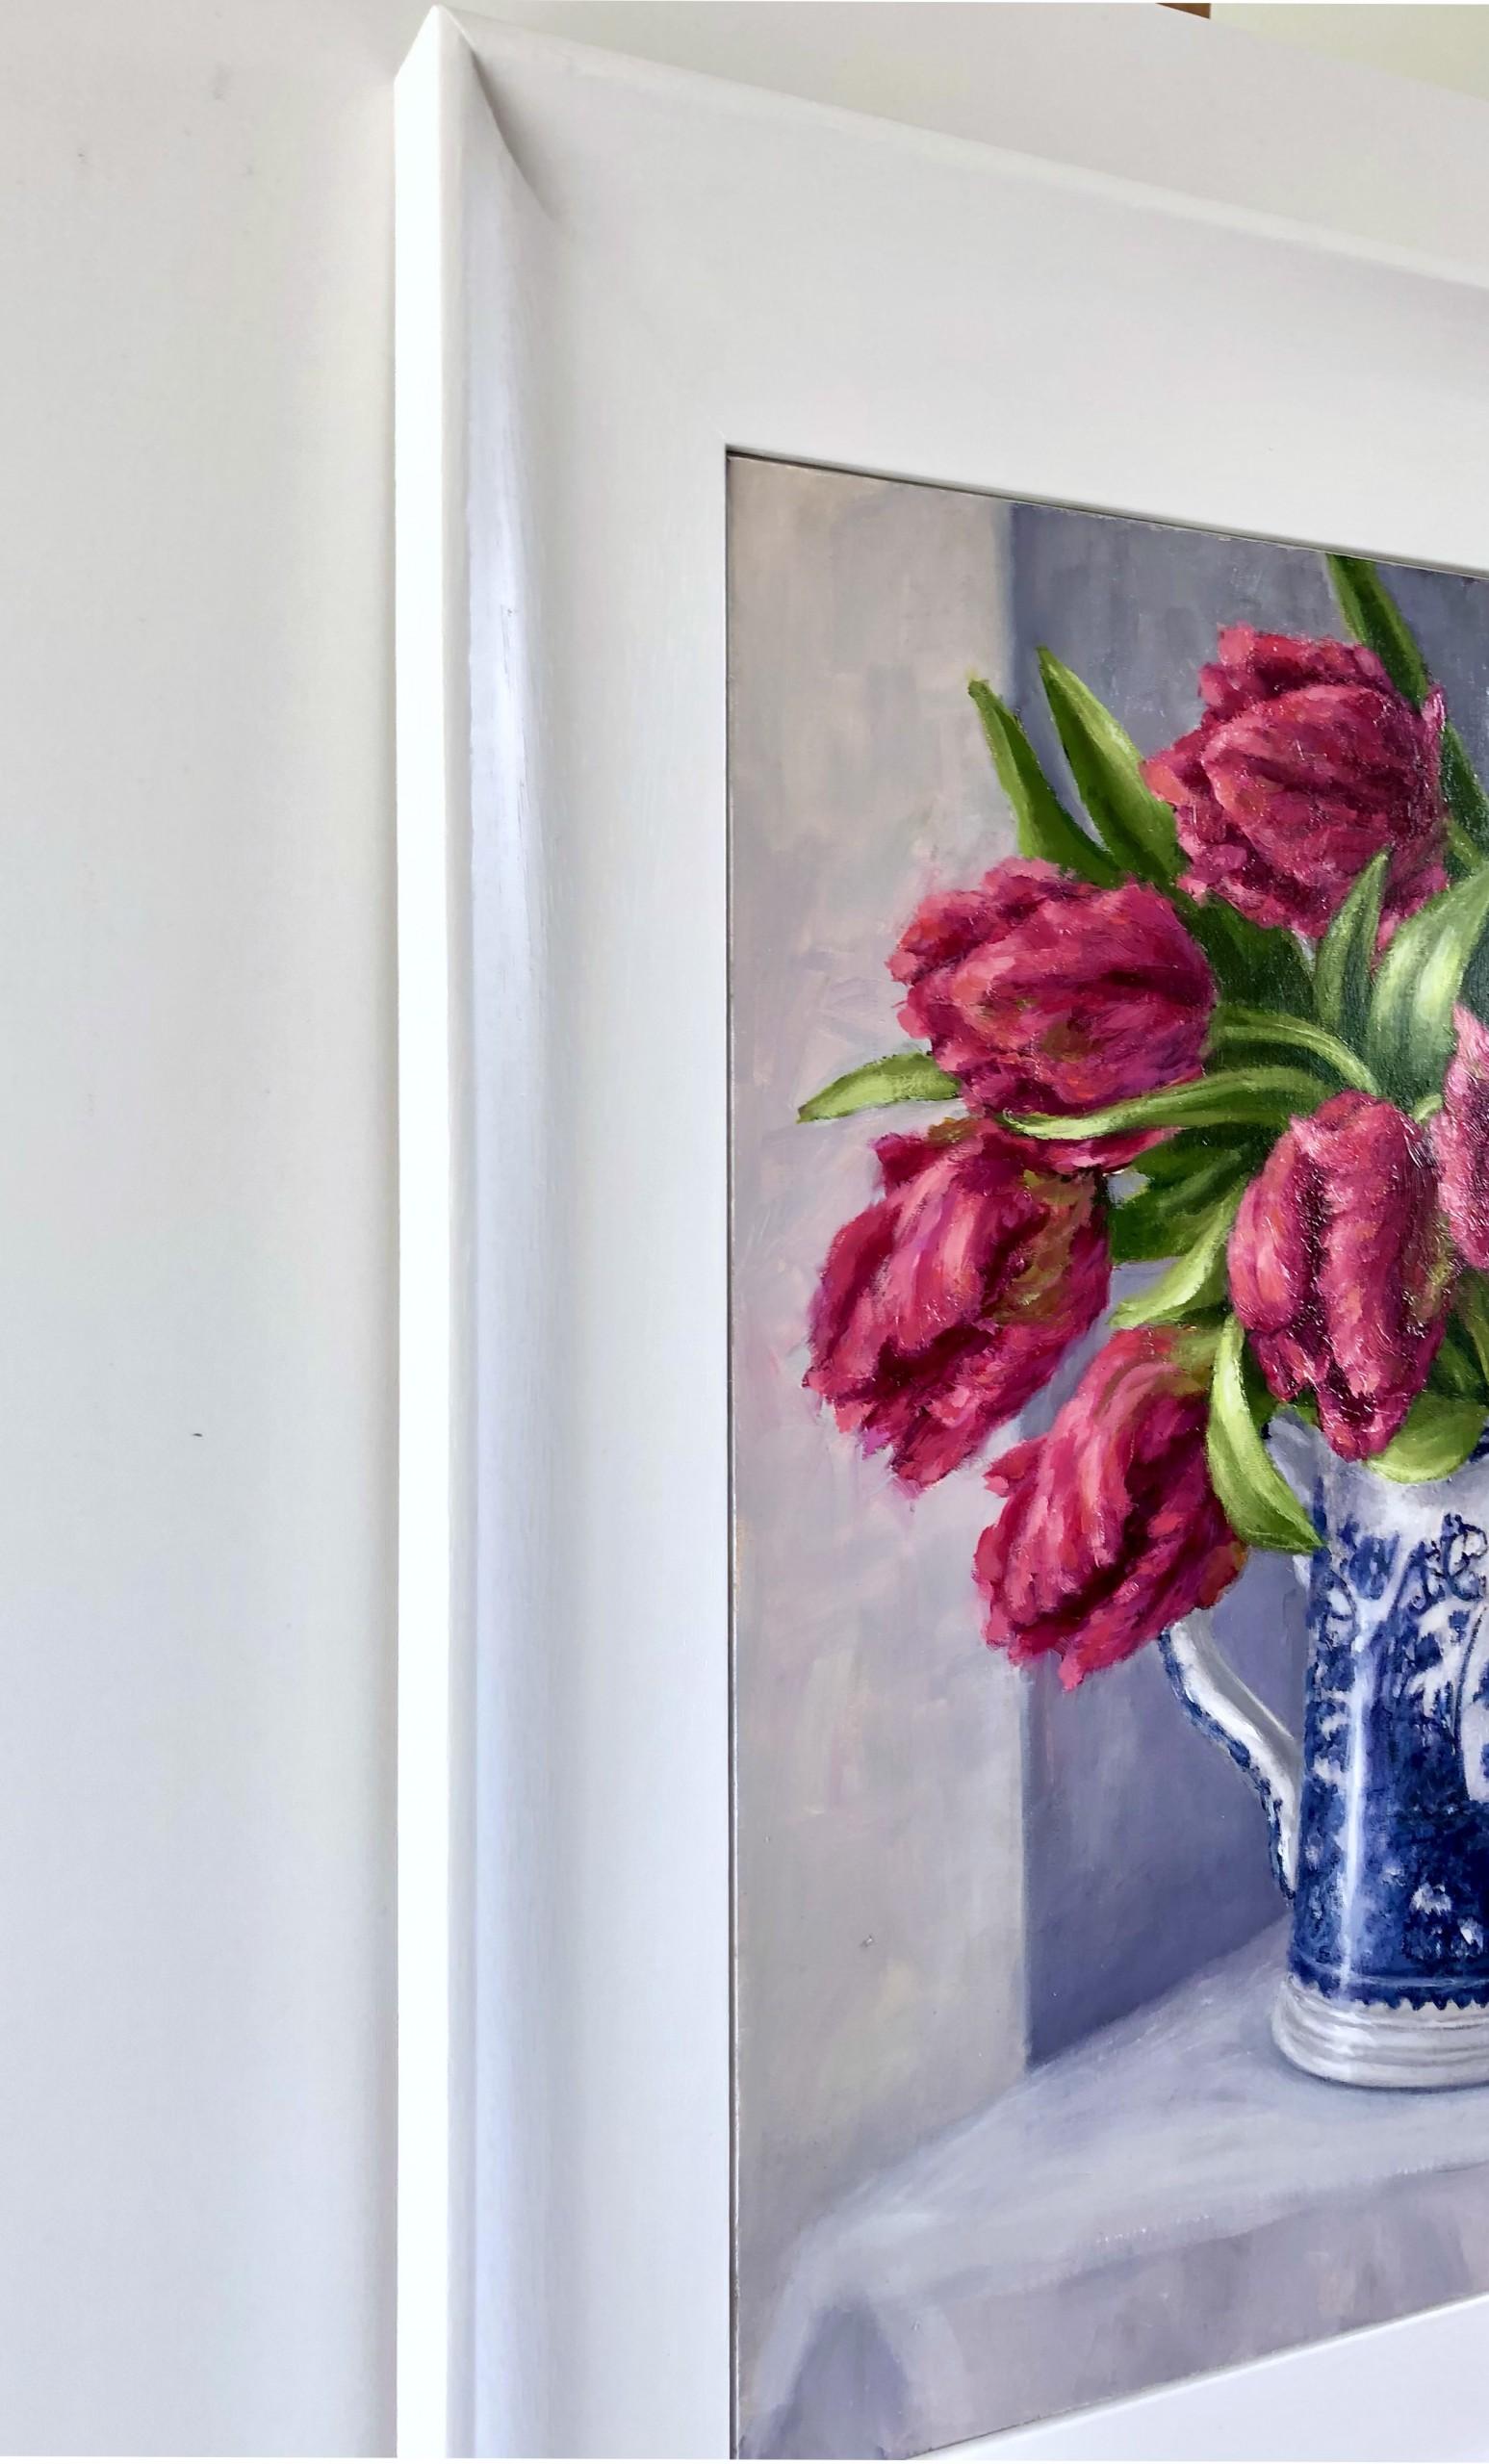 Parrot Tulips [2021]
Original
Still Life
Oil paint on canvas board
Image size: H:53 cm x W:53 cm
Complete Size of Unframed Work: H:40 cm x W:40 cm x D:0.5cm
Framed Size: H:53 cm x W:53 cm x D:2.5cm
Sold Framed

Please note that insitu images are